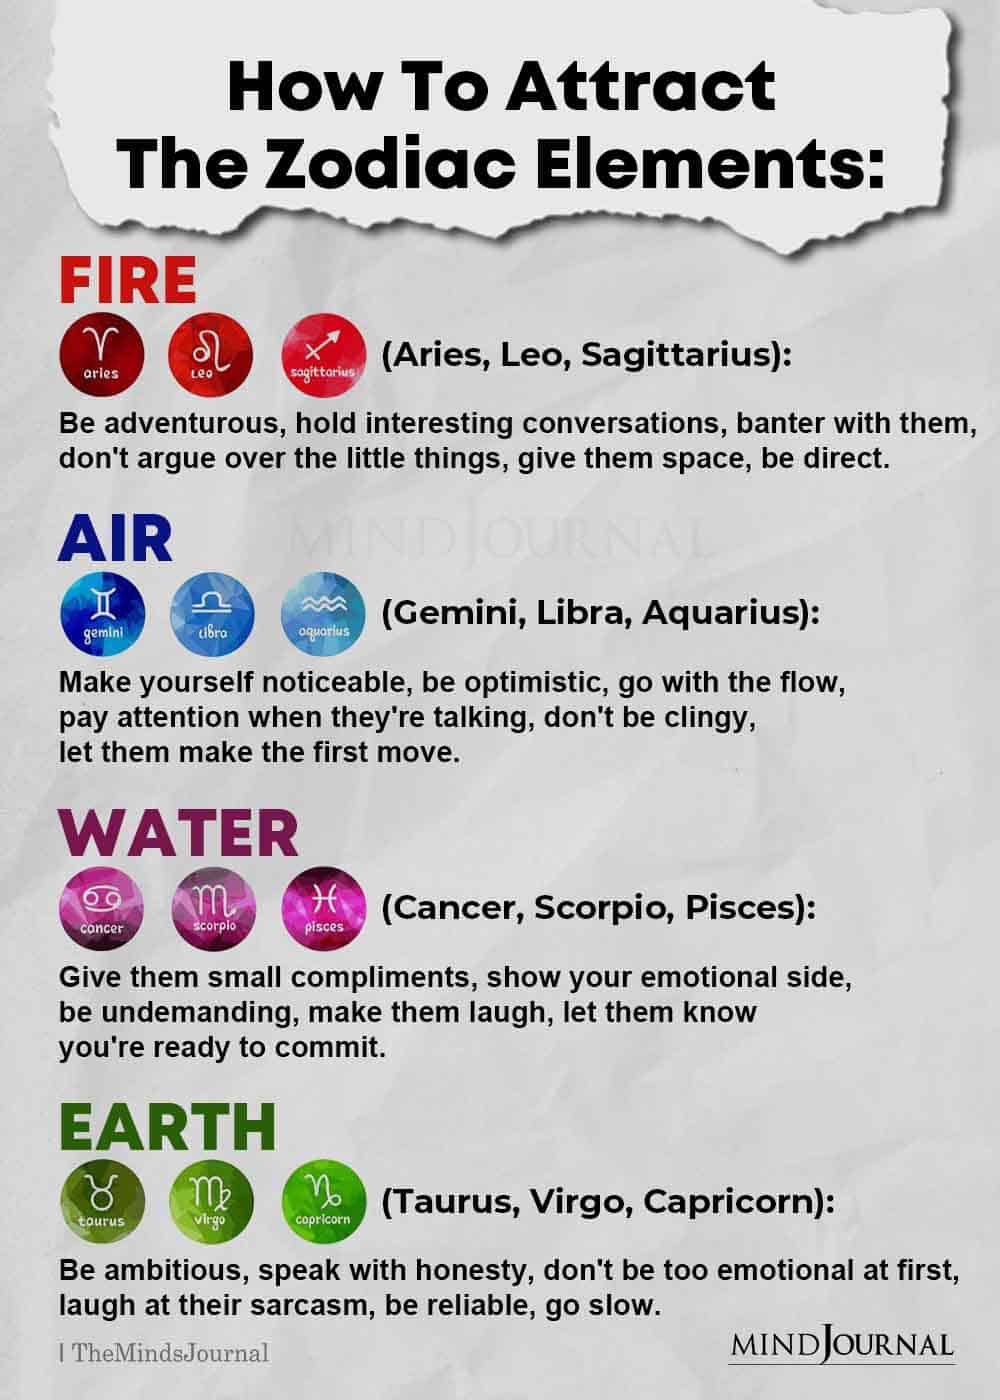 How to Attract the Zodiac Elements